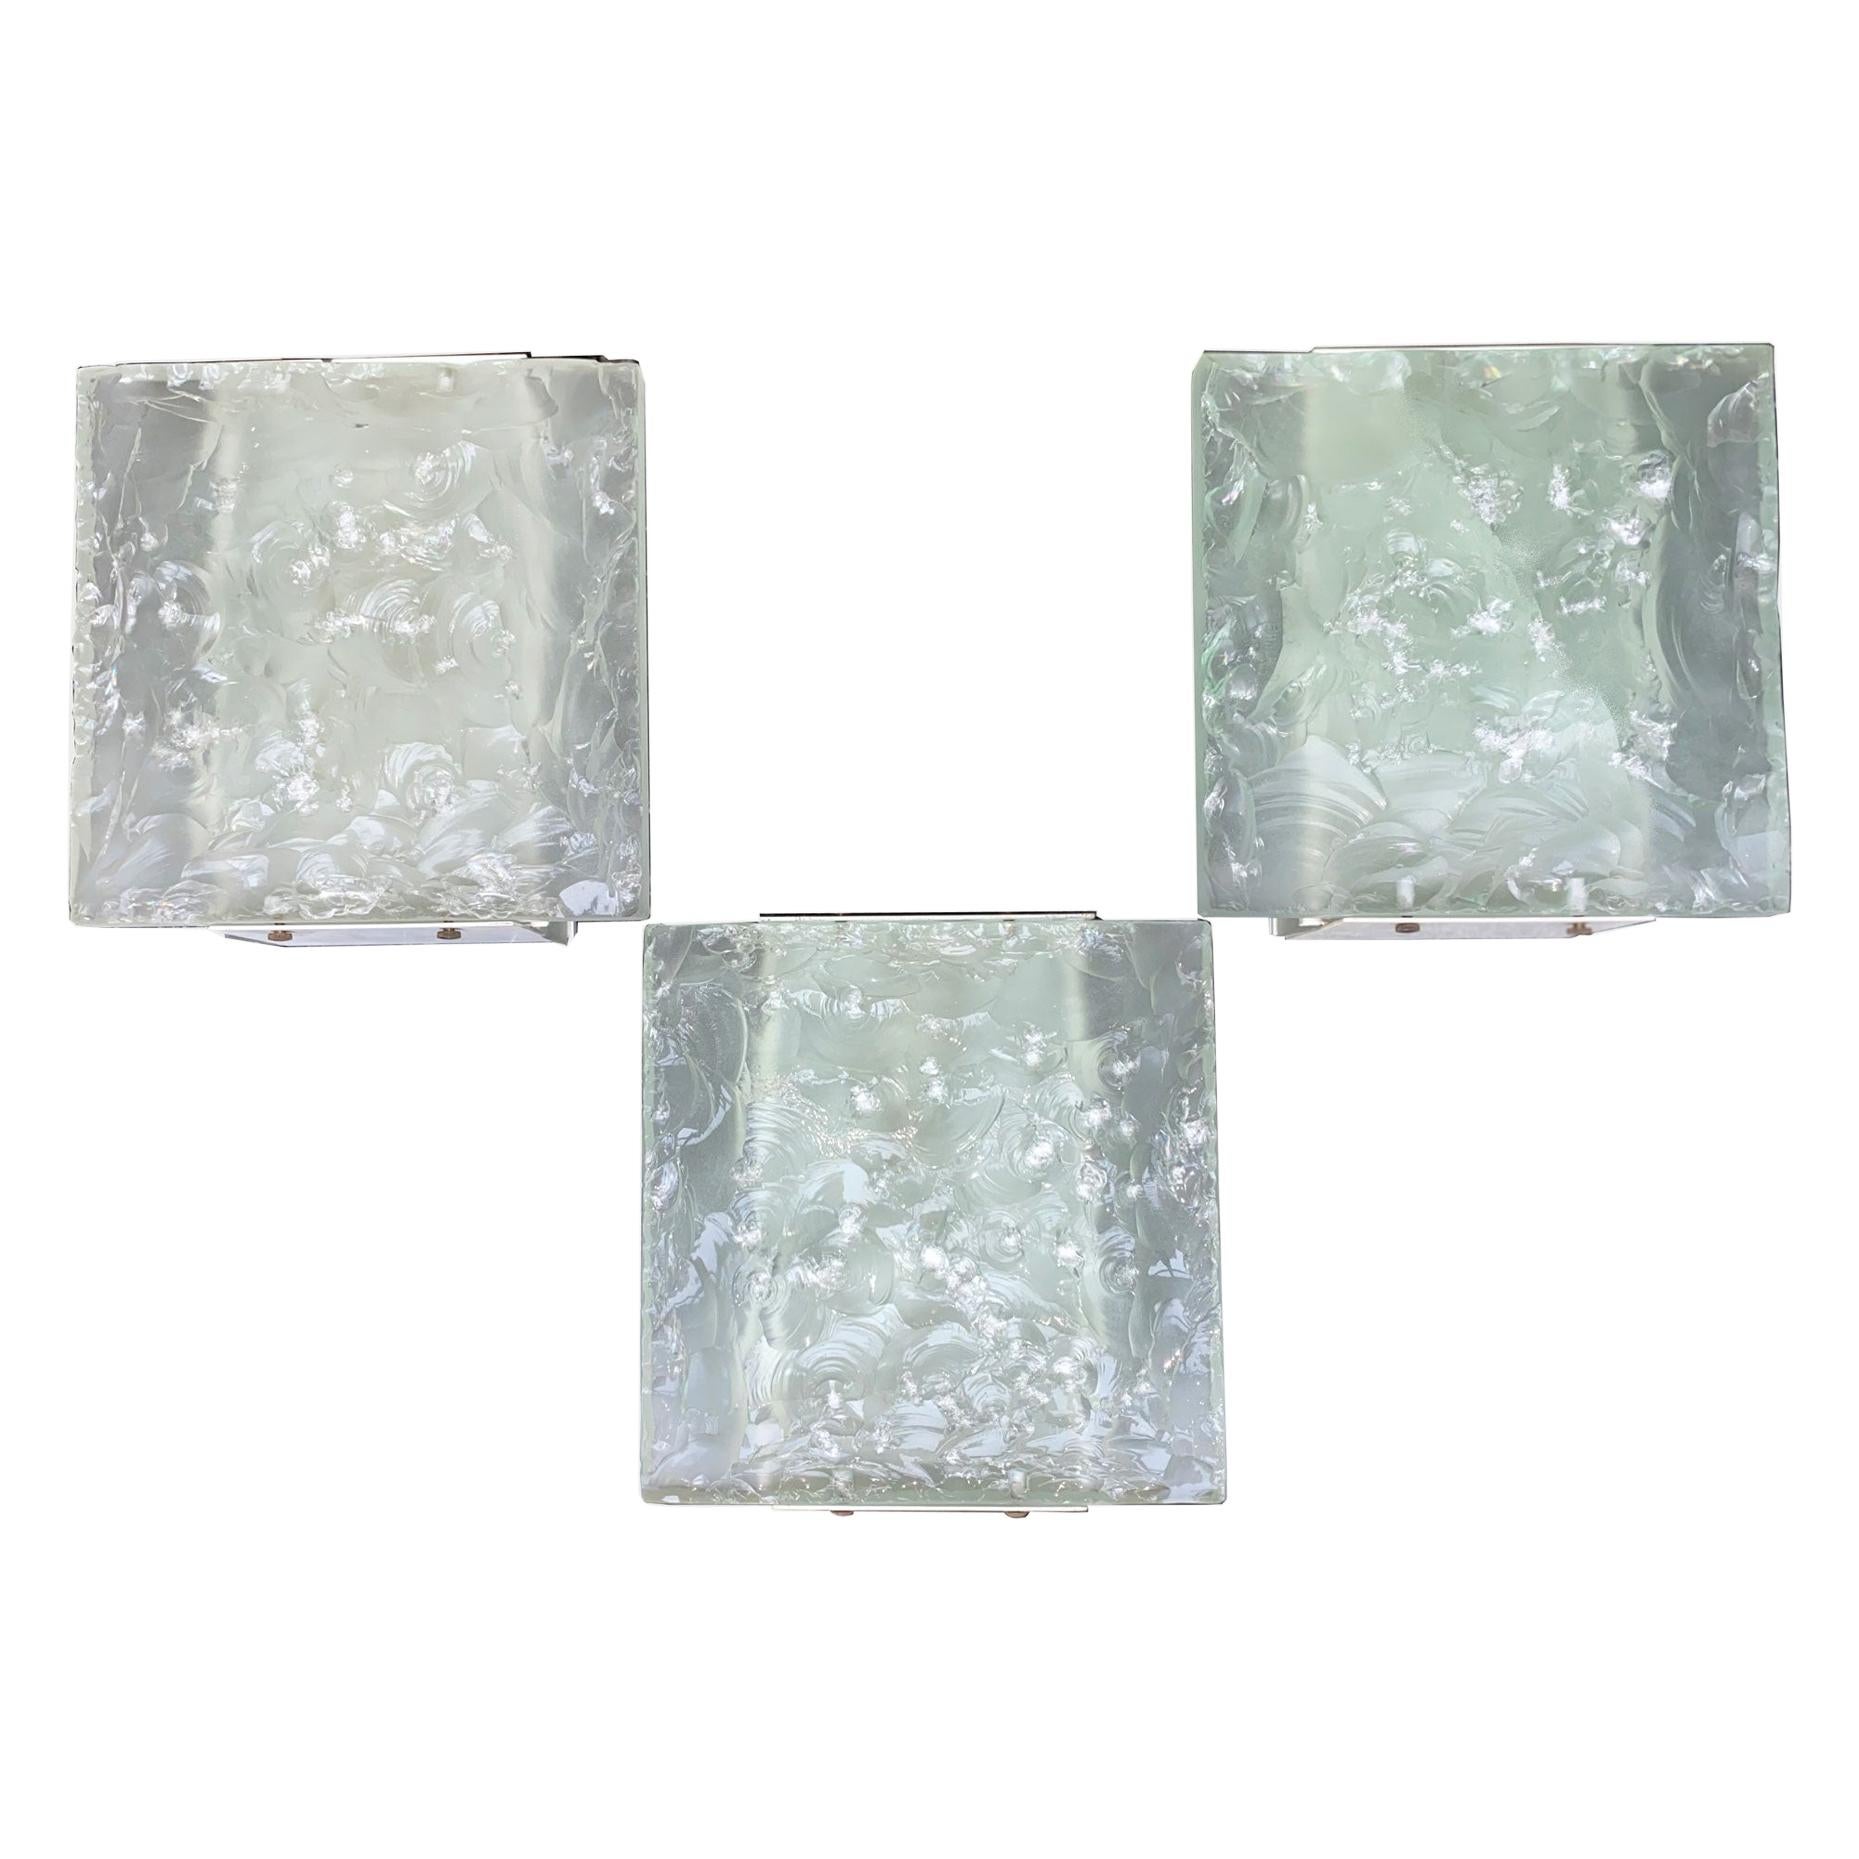 Chiseled Glass Sconces by Max Ingrand for Fontana Arte Mod. 2311, Italy, 1960s